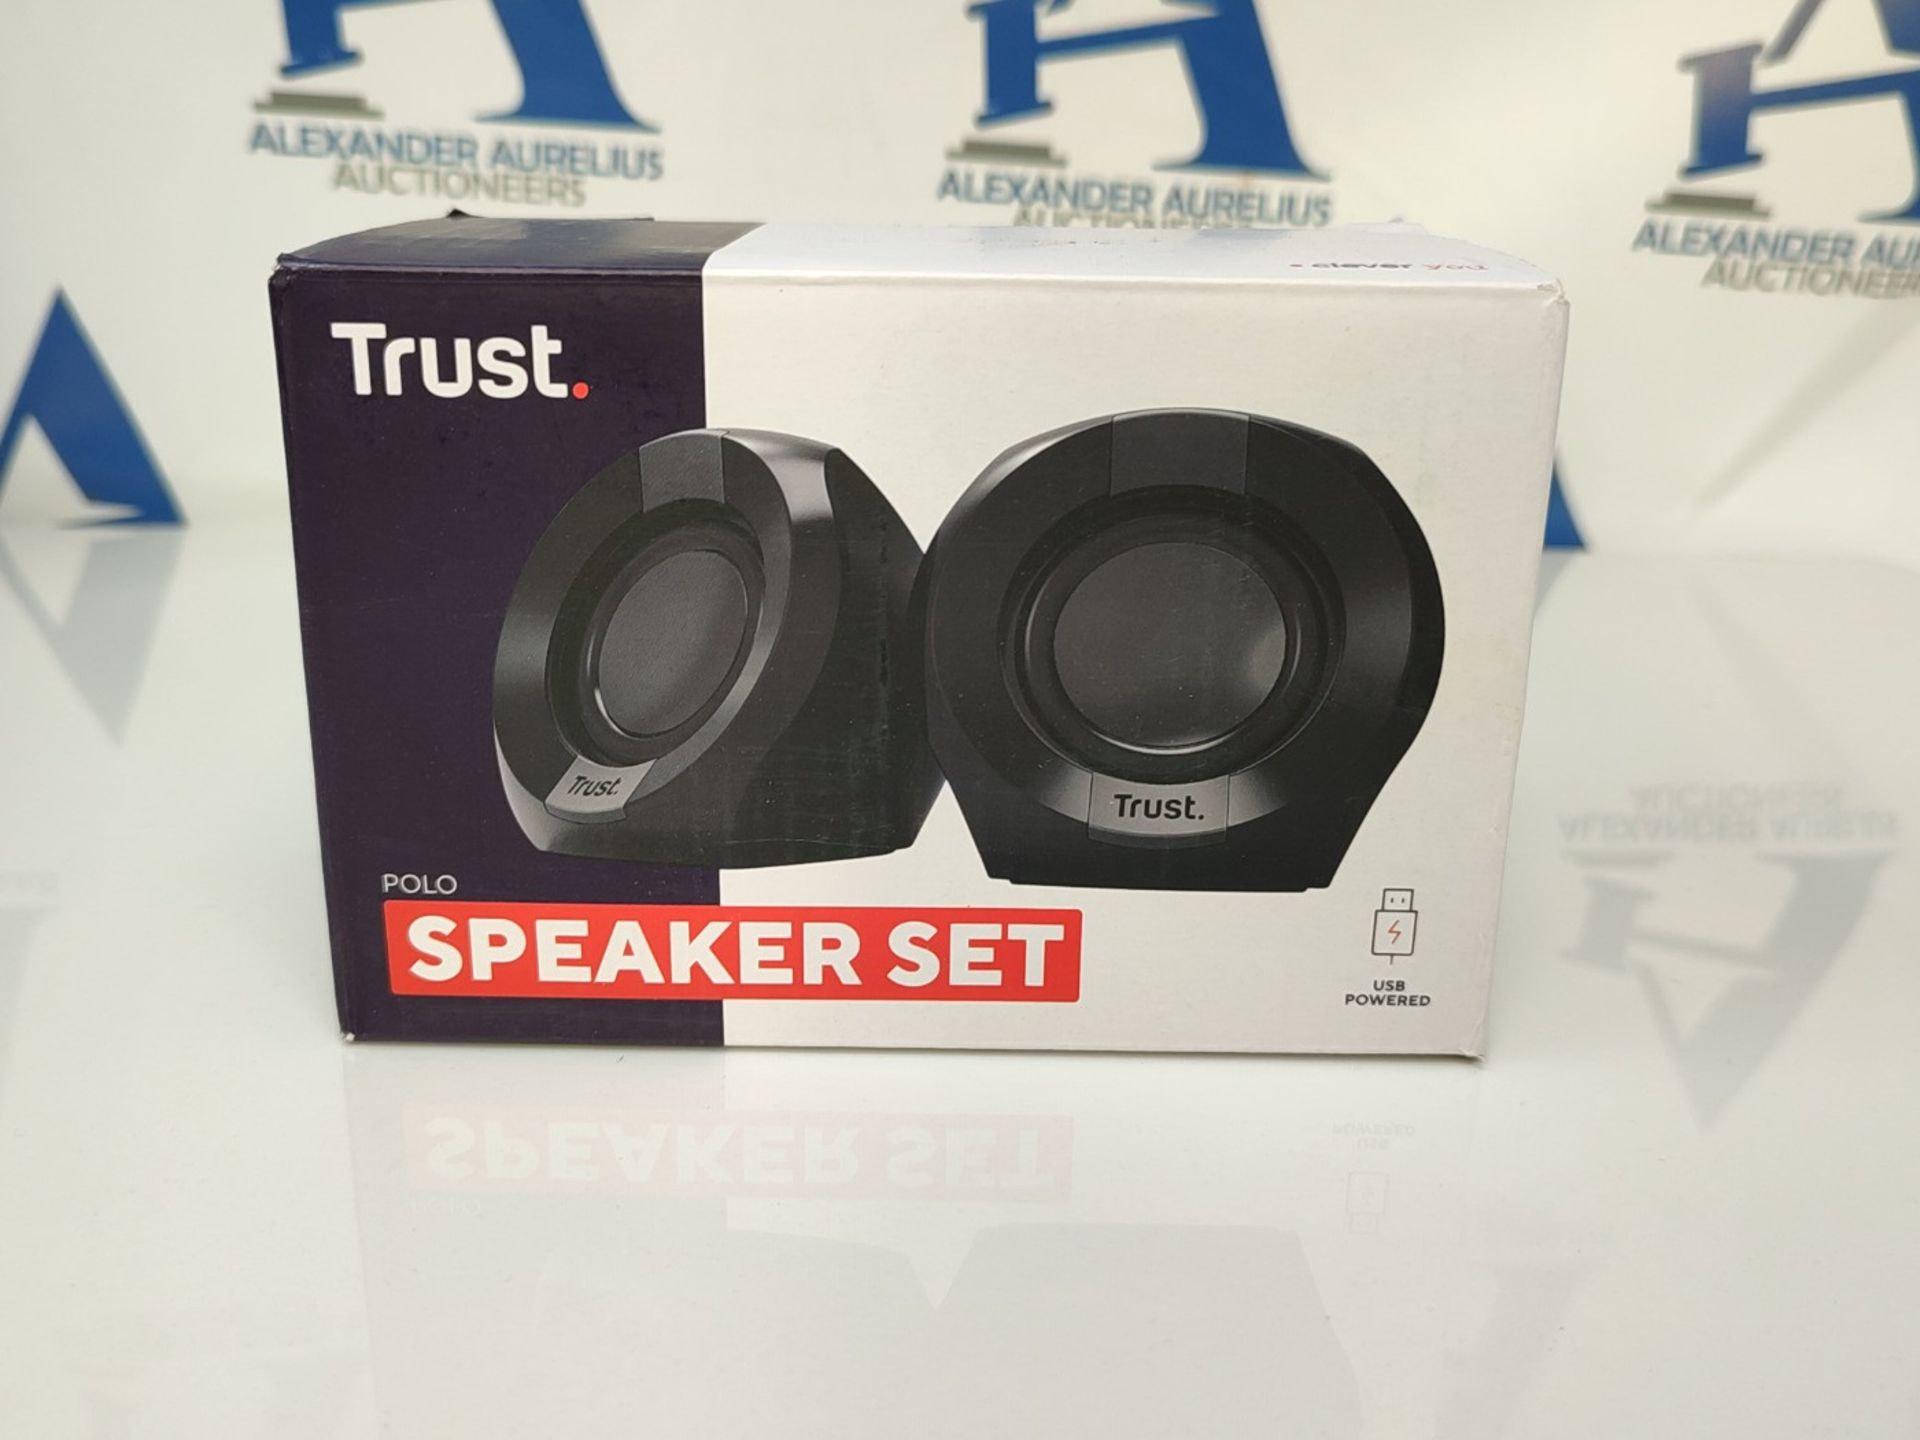 Trust Polo Small PC Speakers 2.0, 8W (4W RMS), Compact speaker set, USB powered speake - Image 2 of 3